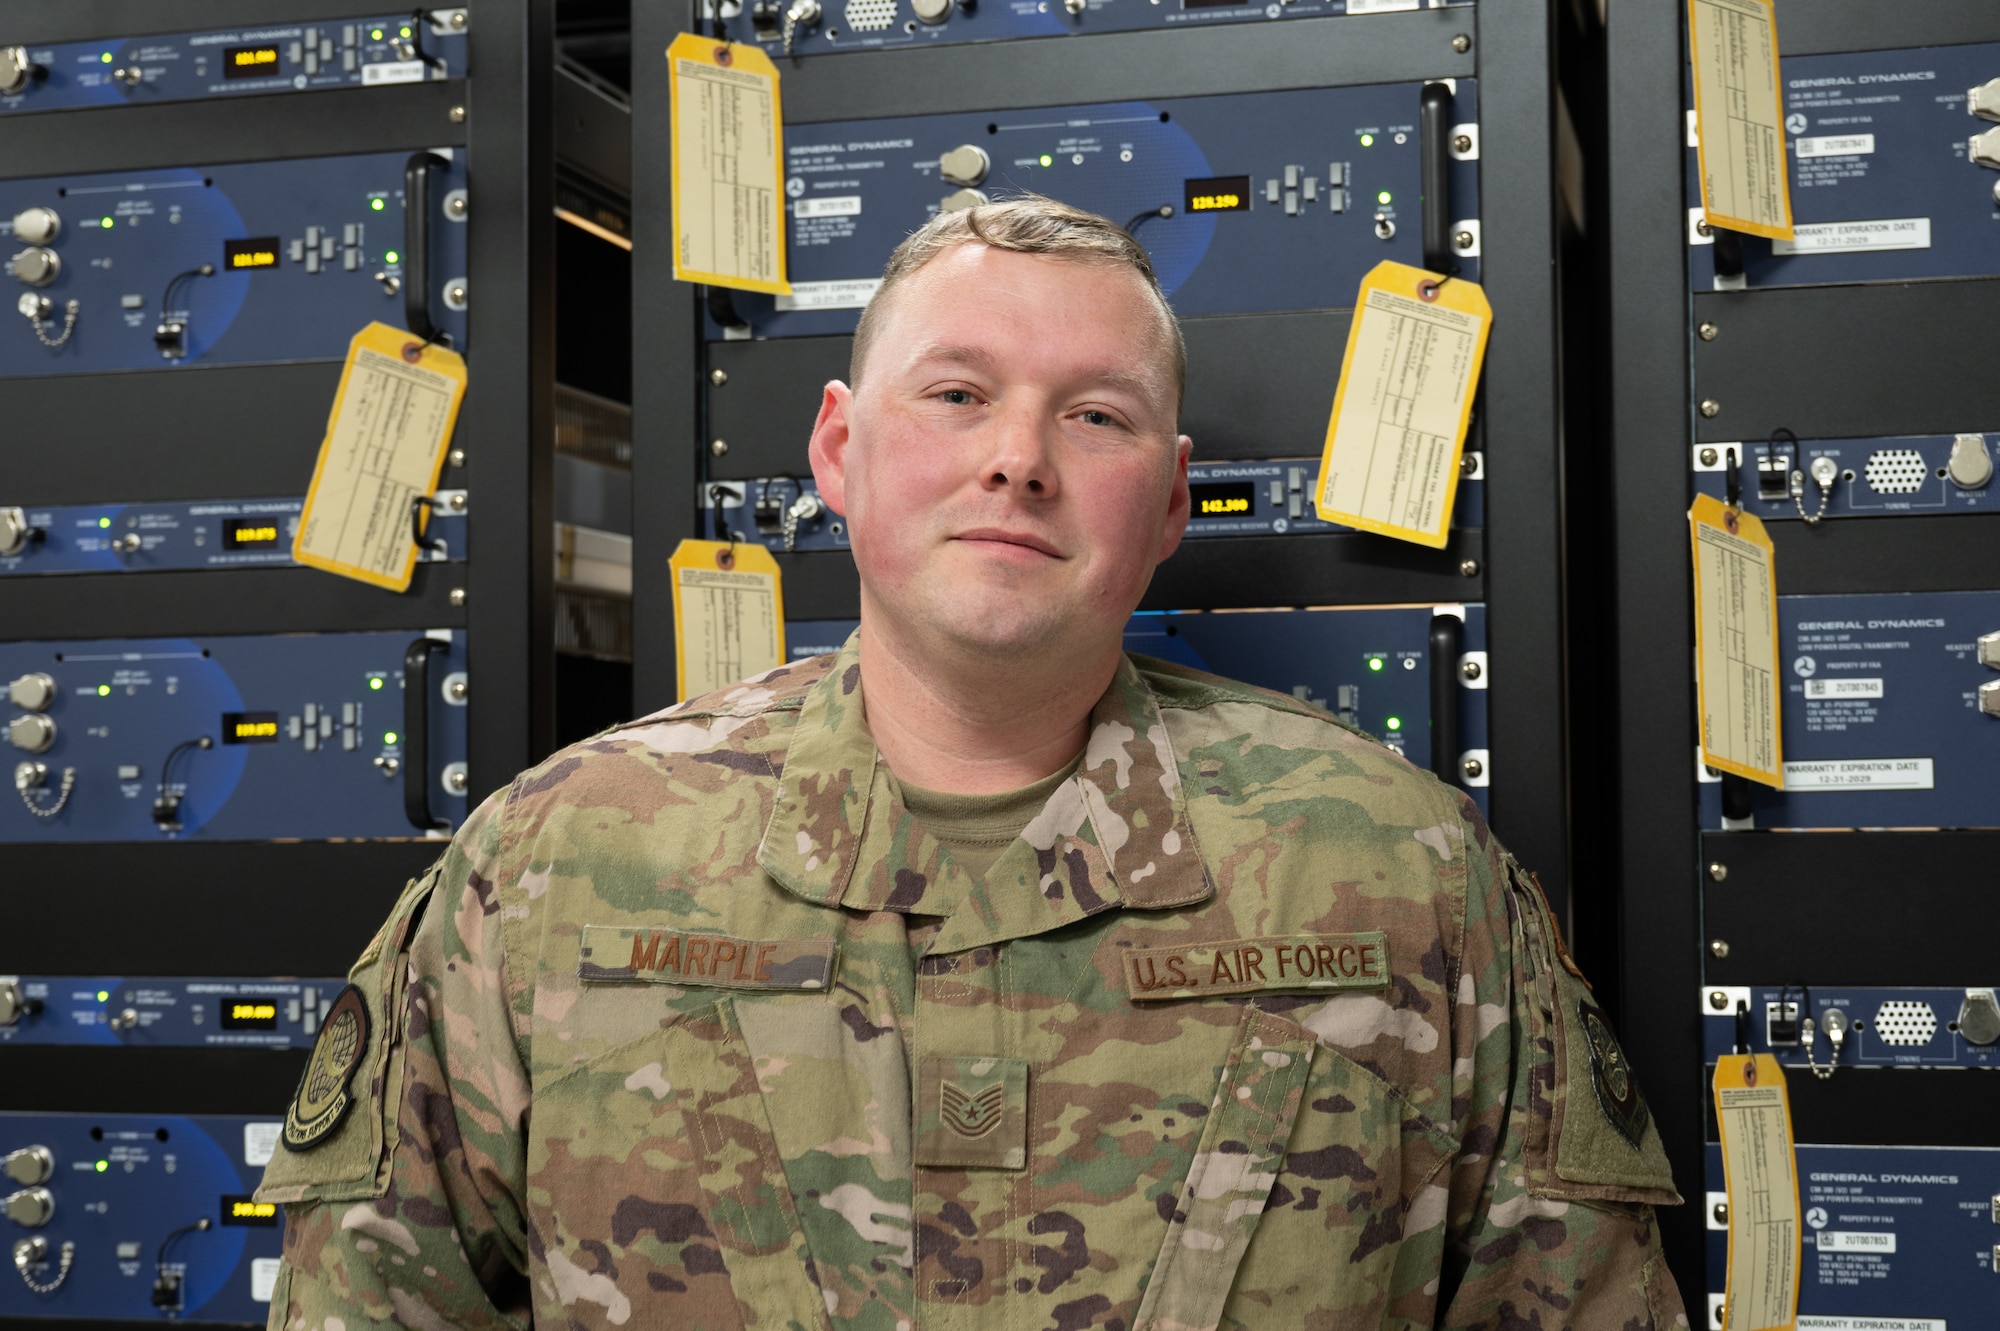 TSgt. Marple stands in front of a wall of radios